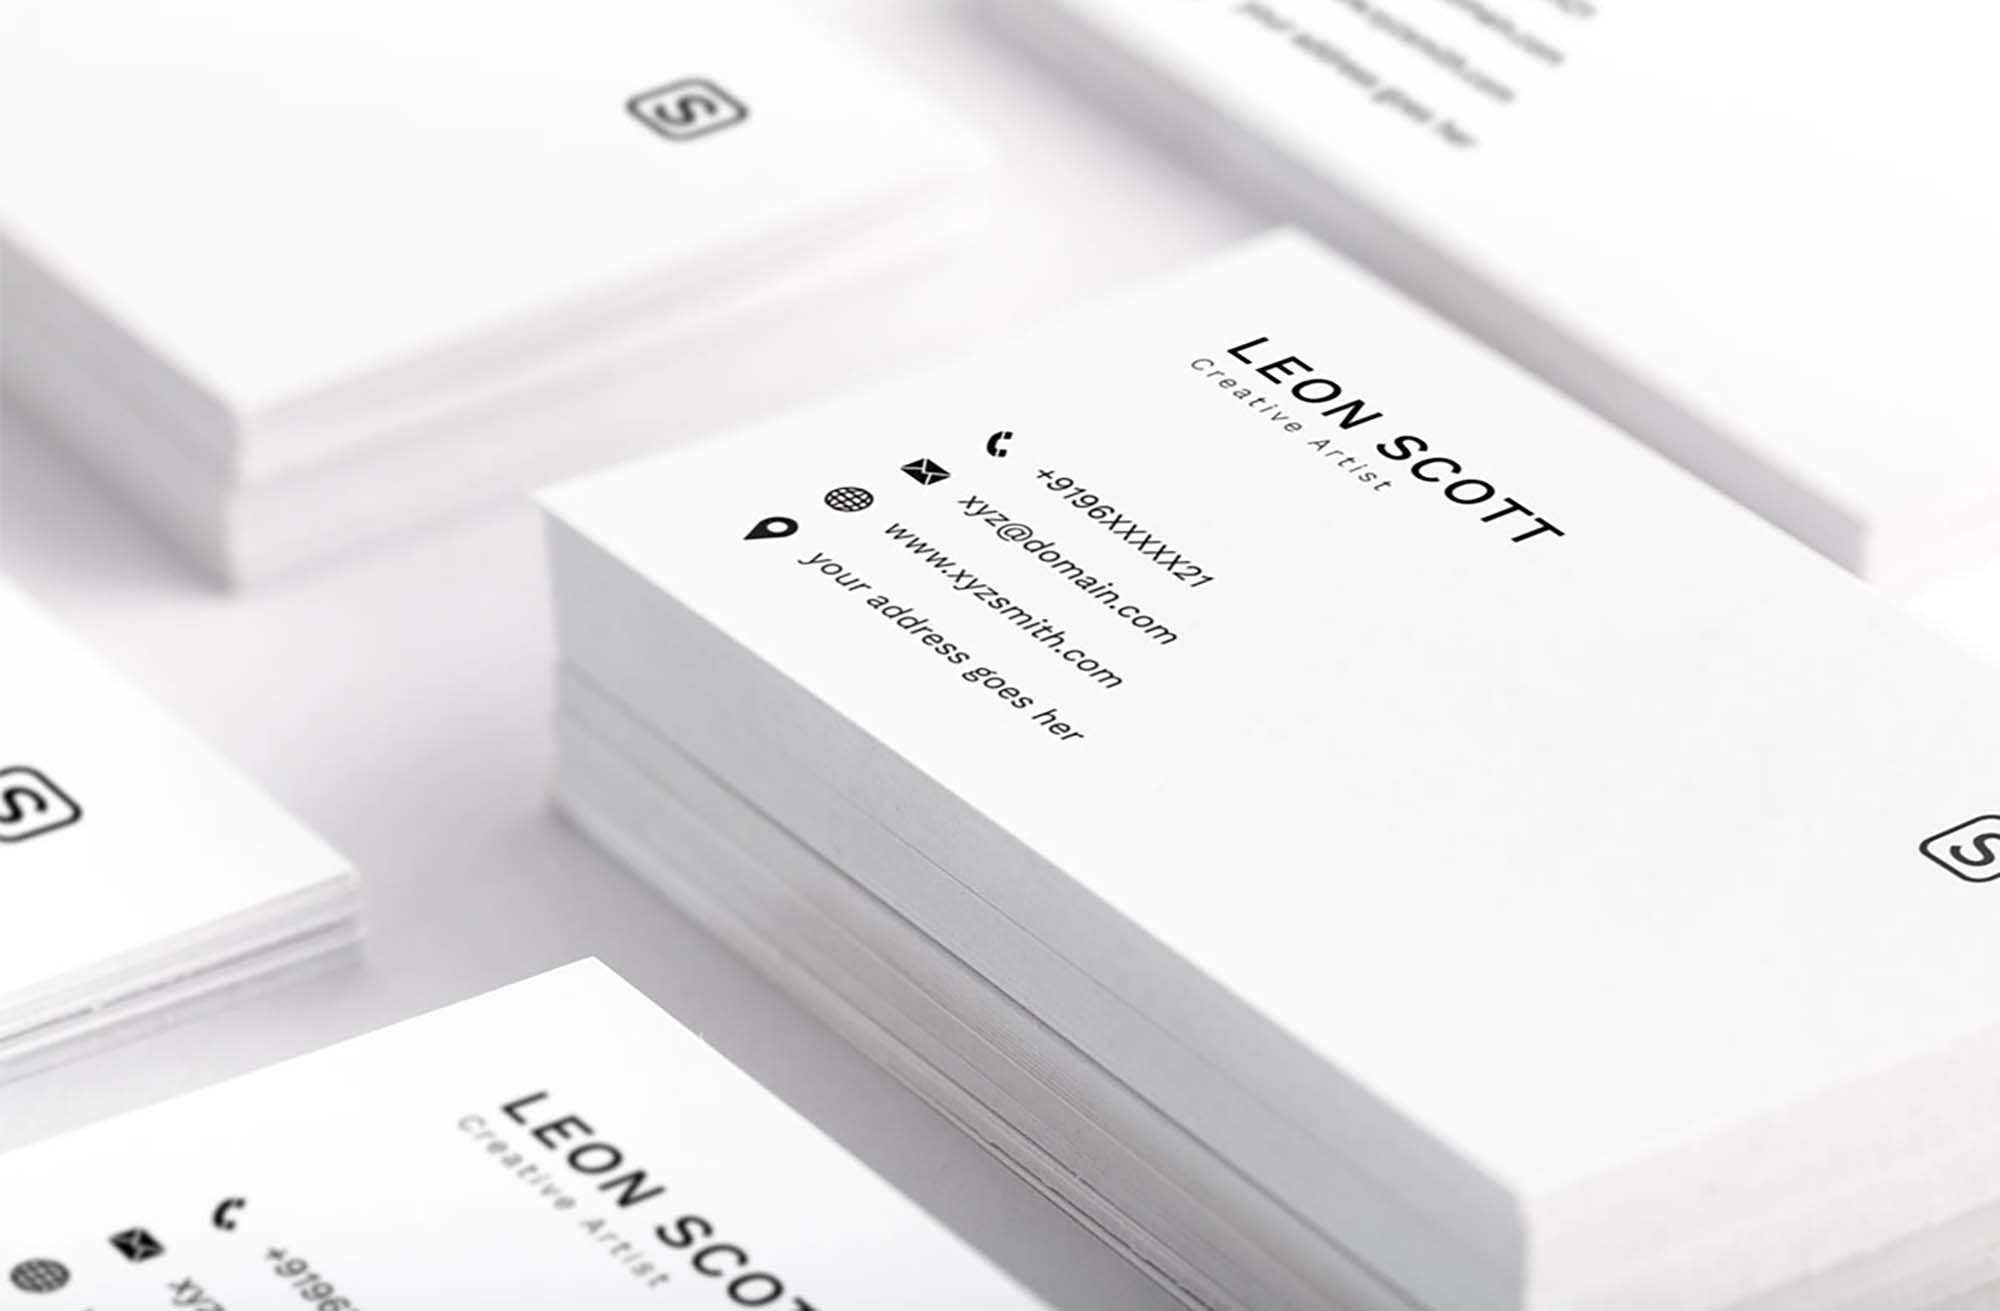 Free Minimal Elegant Business Card Template (Psd) Throughout Name Card Template Photoshop